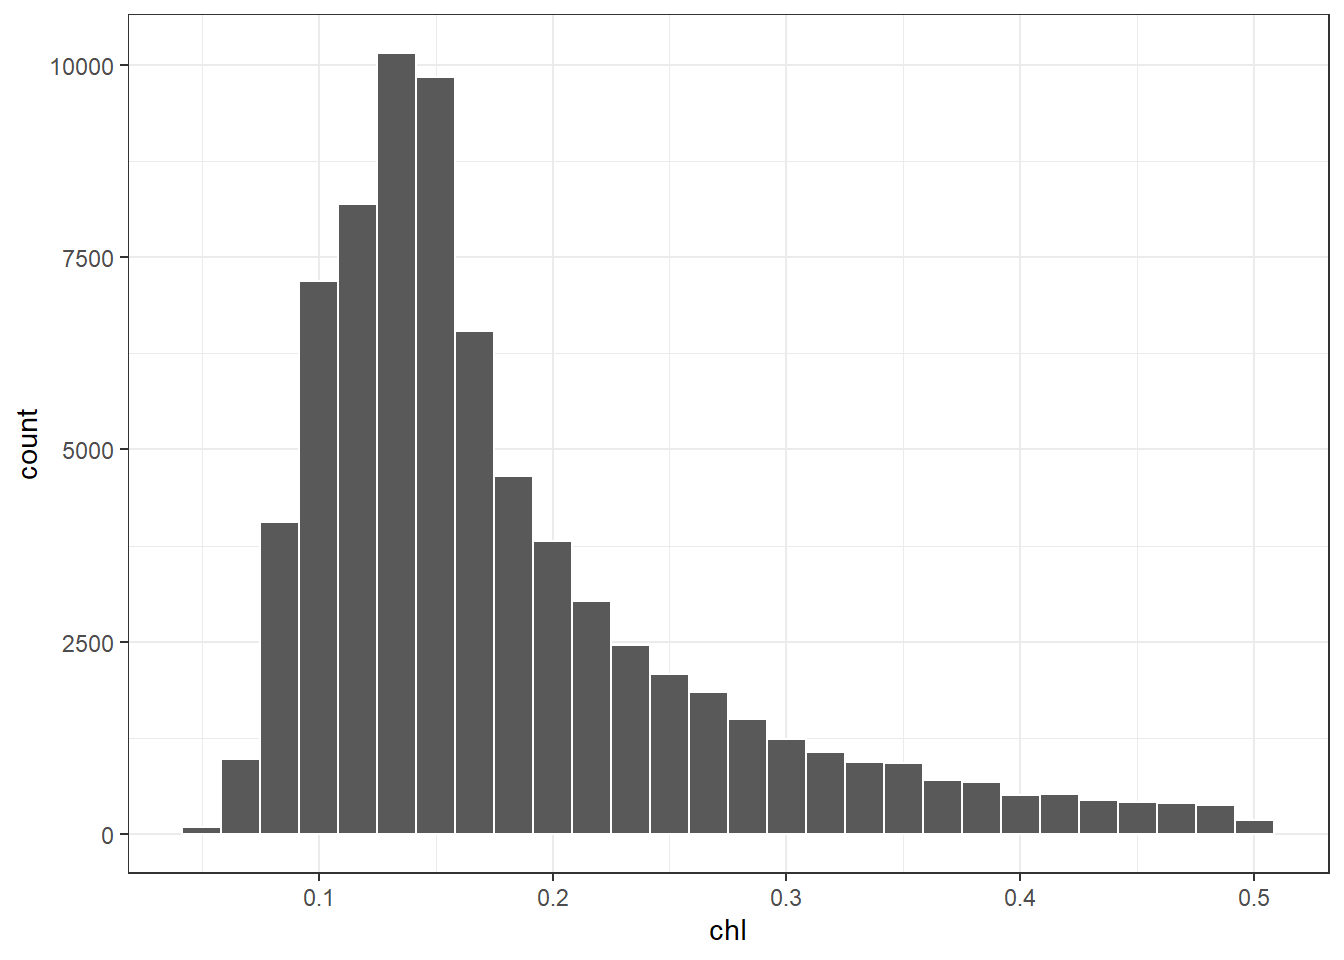 Histogram showing the distribution of chlorophyll concentration